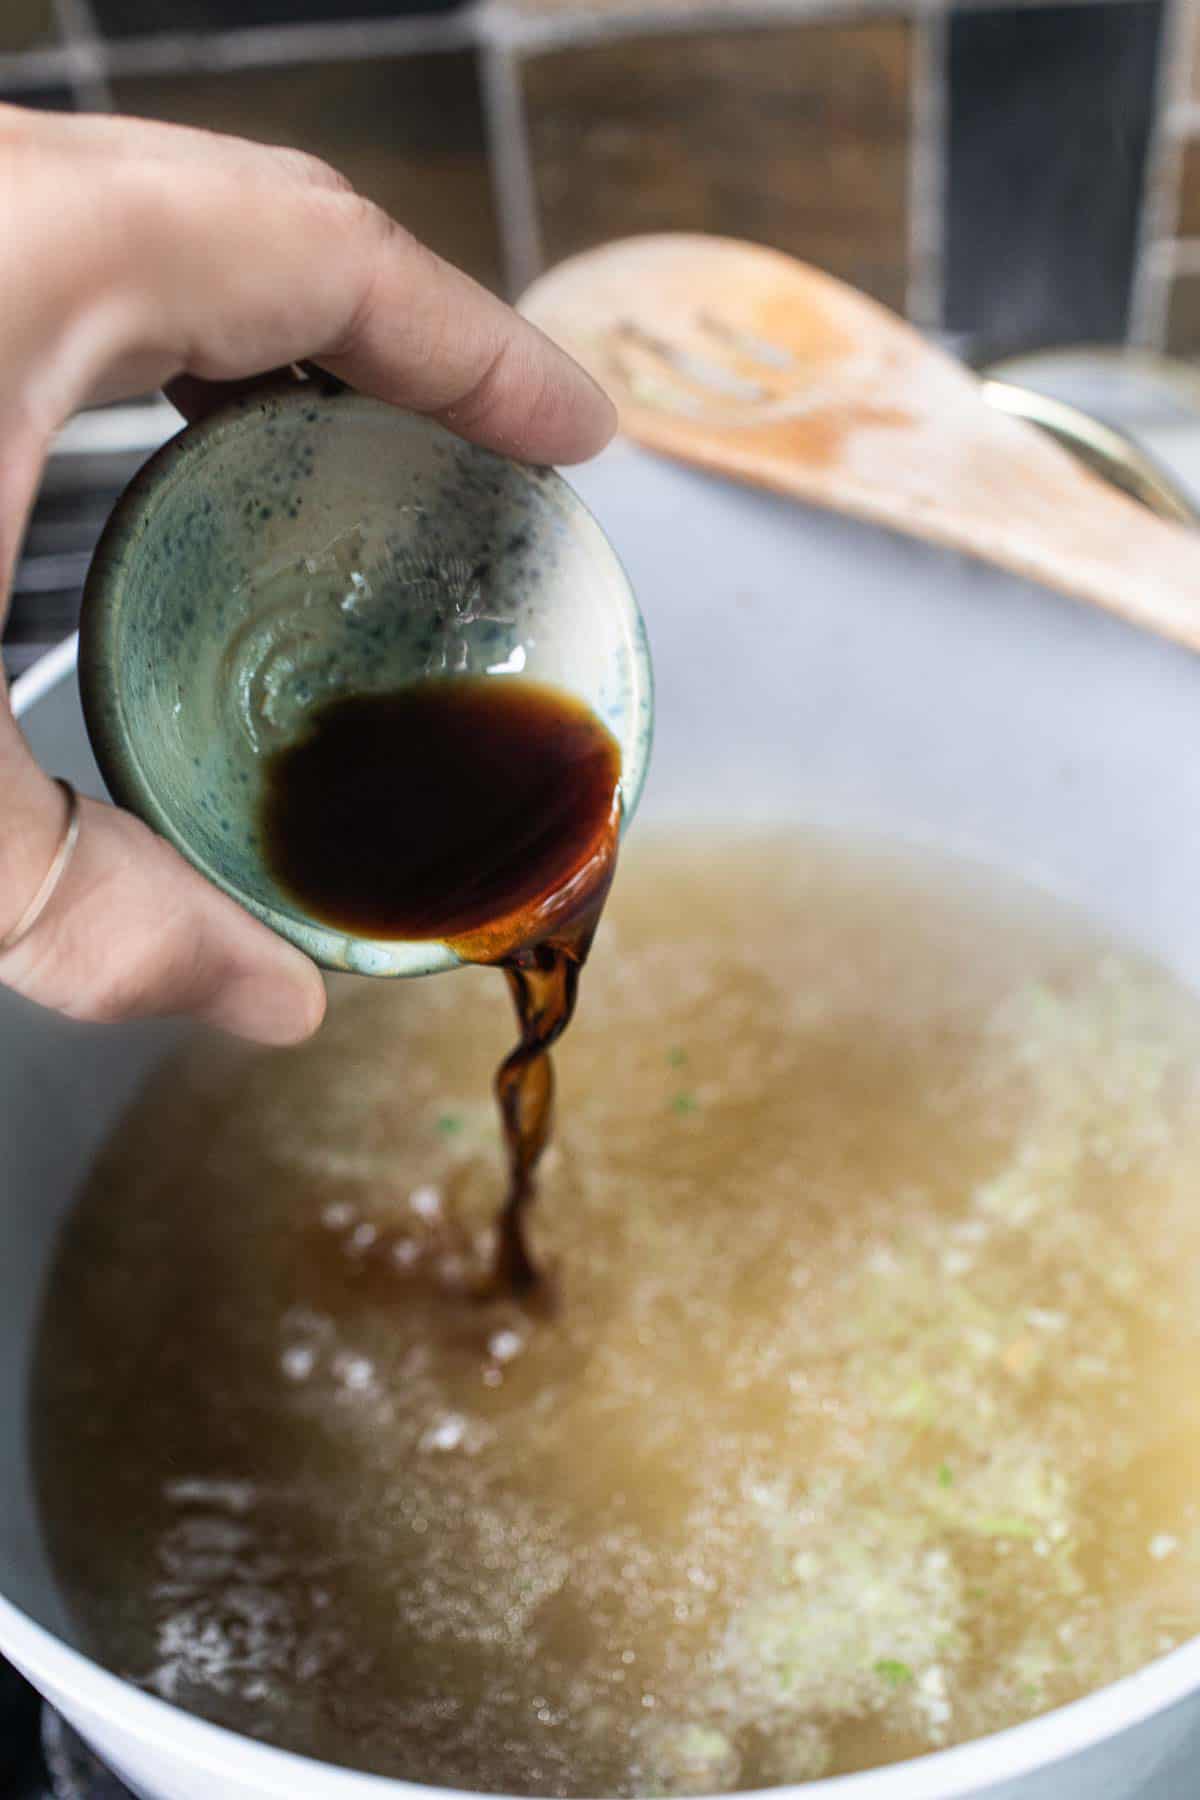 Sauce pouring into a pot of broth.